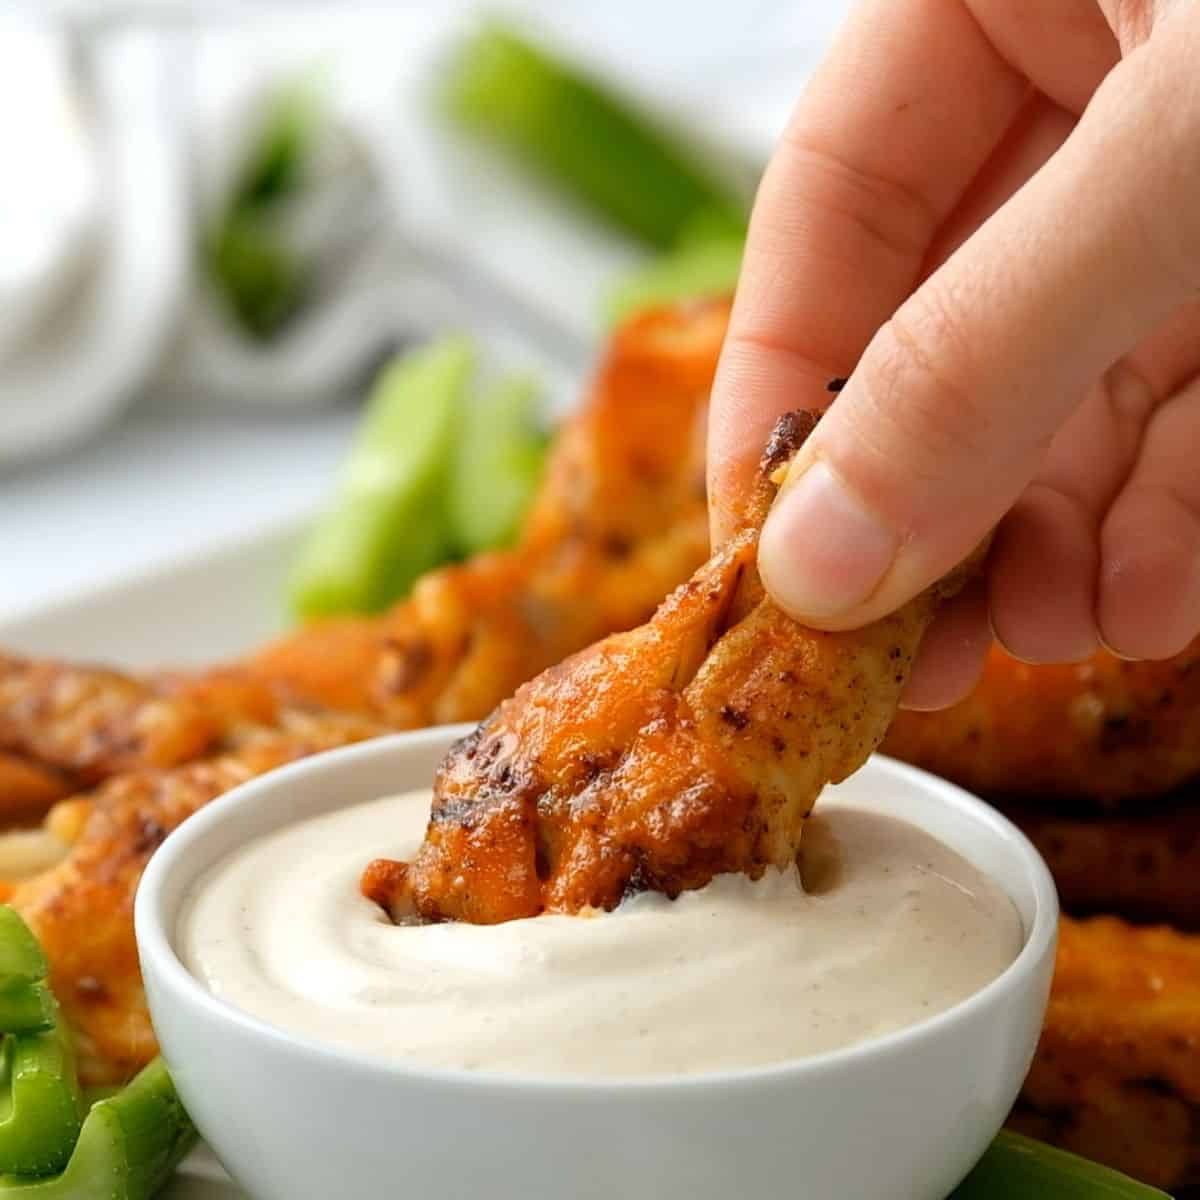 Instant Pot Chicken Wing being dipped into ranch dressing.